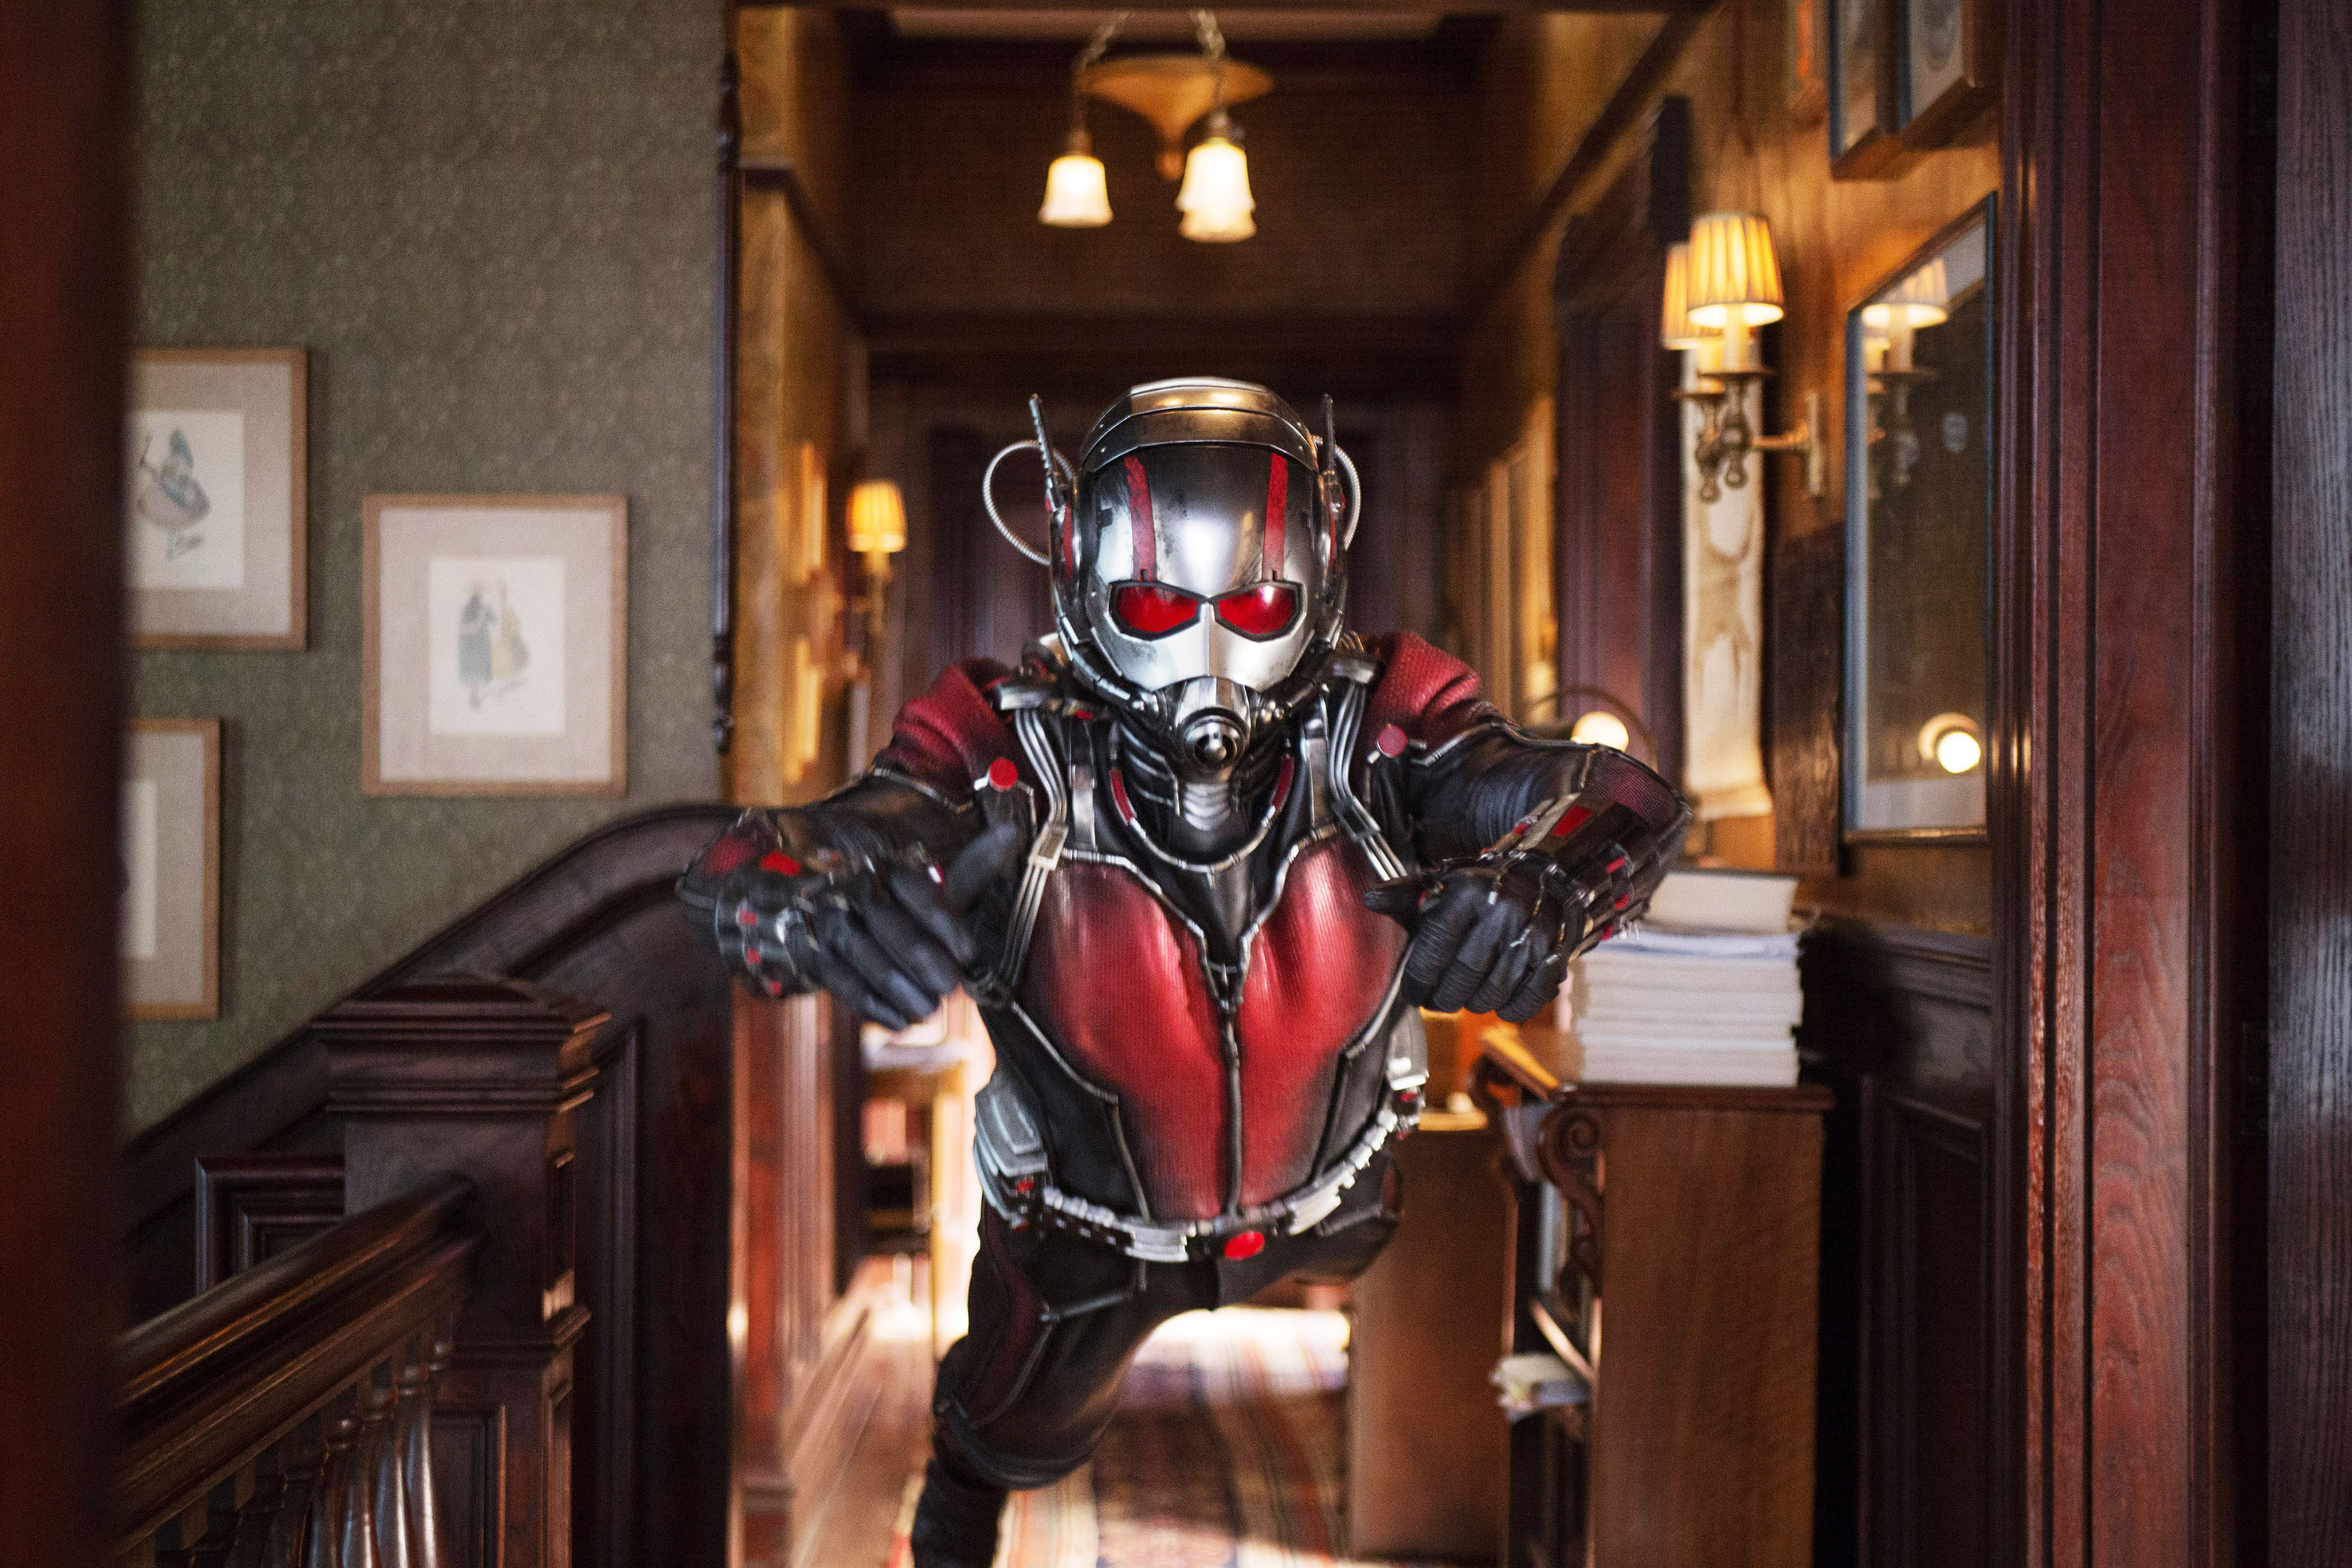 Paul flying in a home as ant man